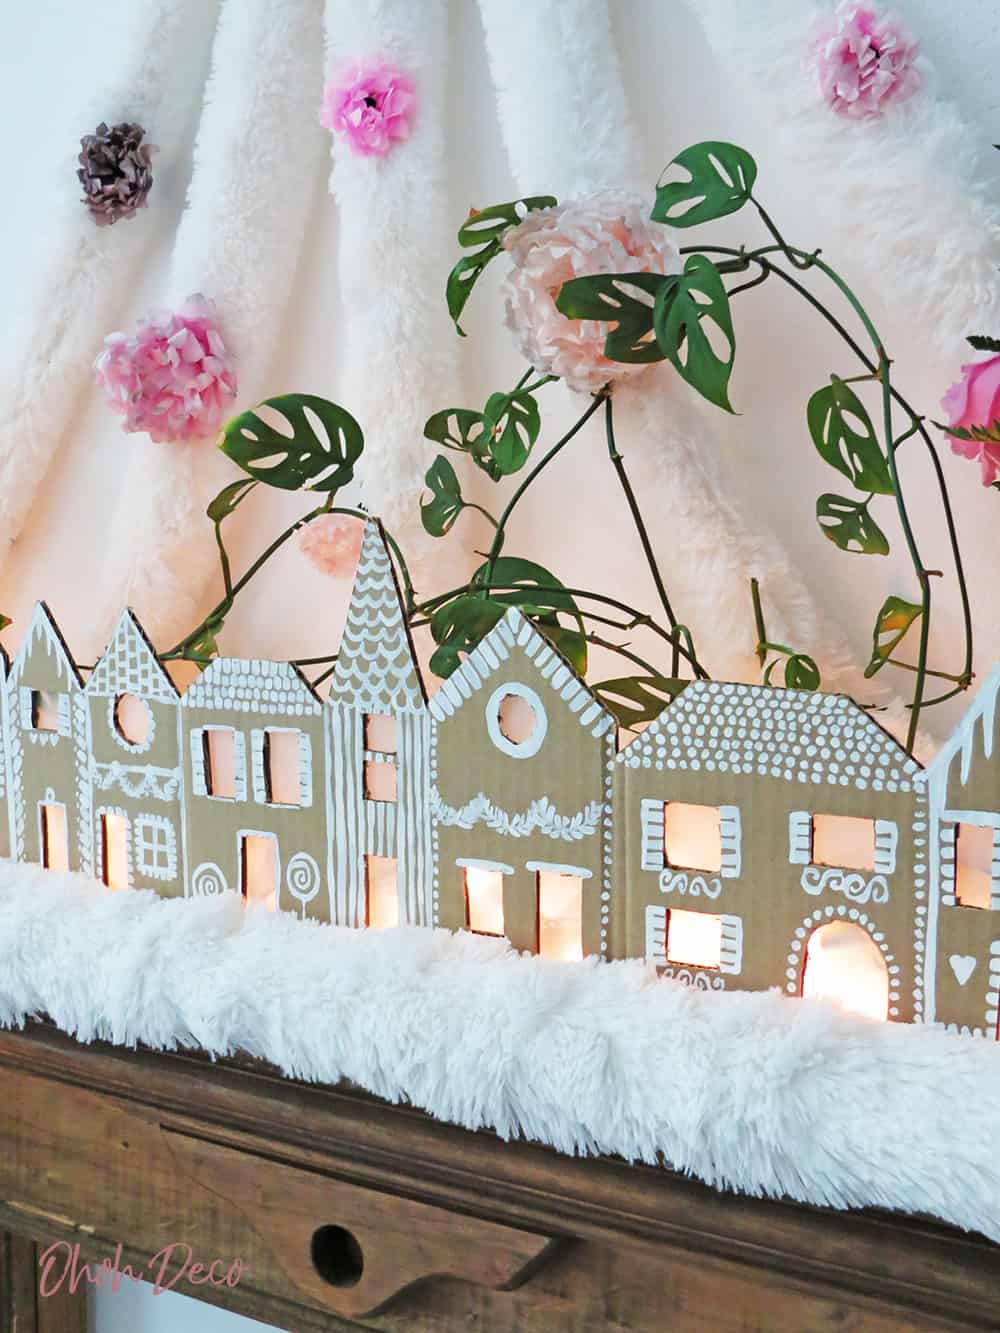 How to make a Christmas ginger house decor with cardboard